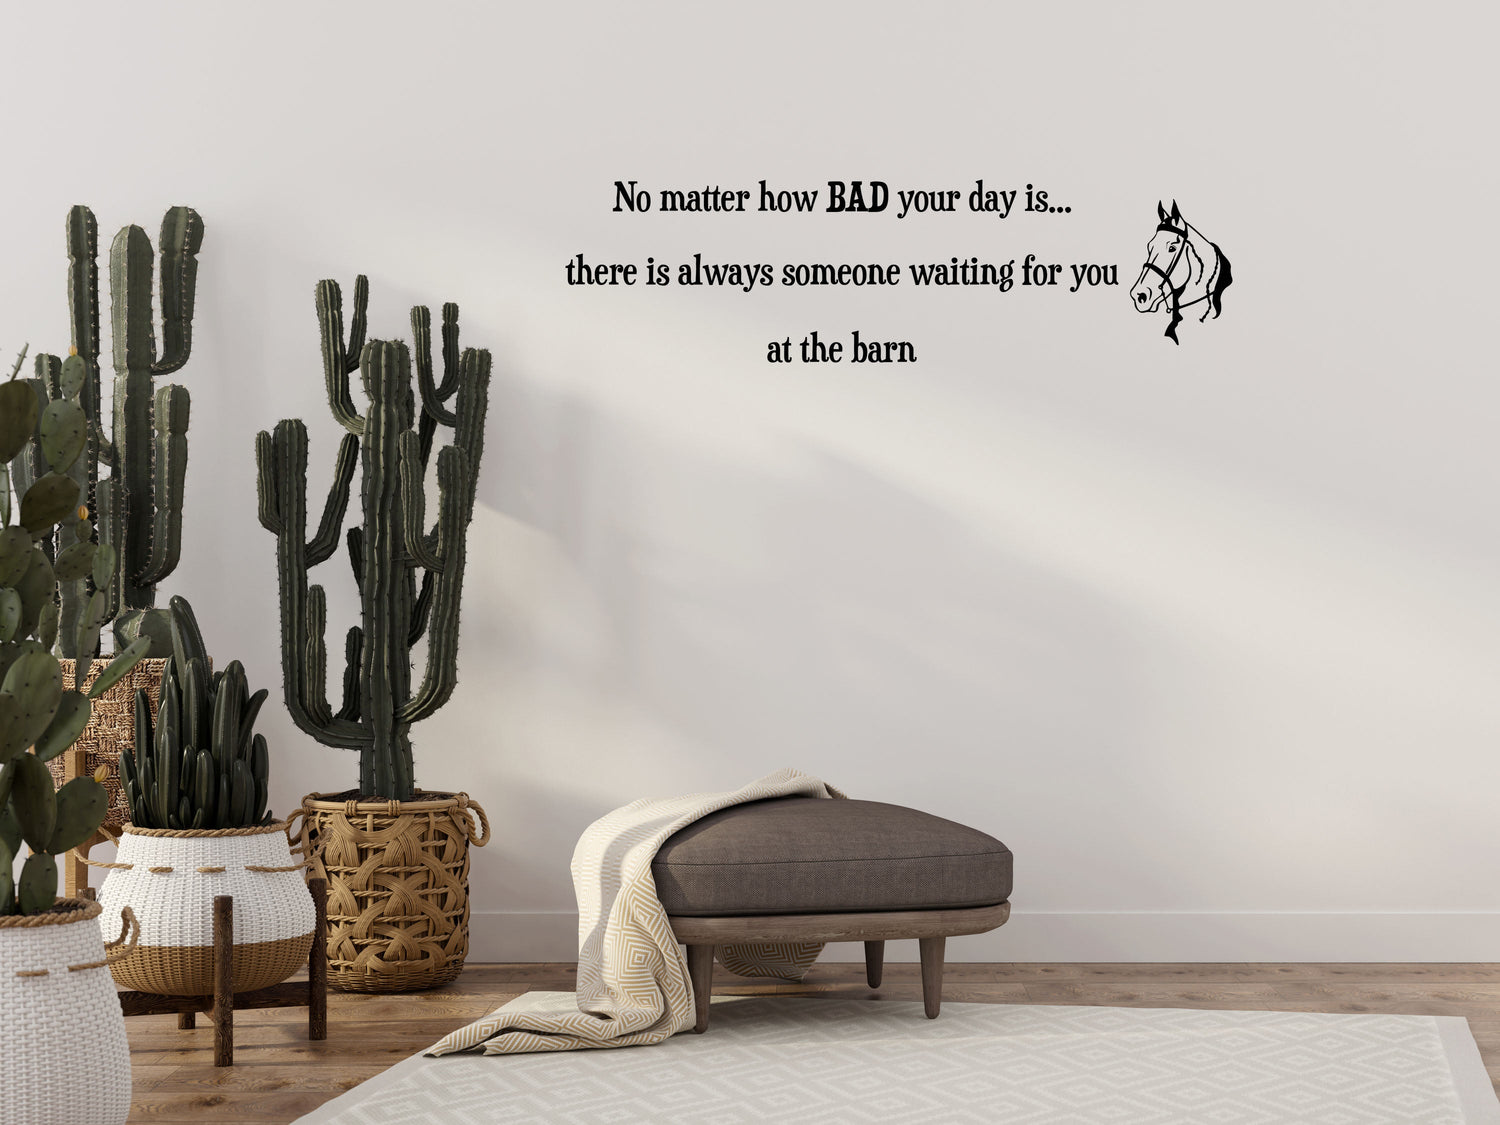 No Matter How Bad Your Day Is - Inspirational Wall Decals Vinyl Wall Decal Inspirational Wall Signs 